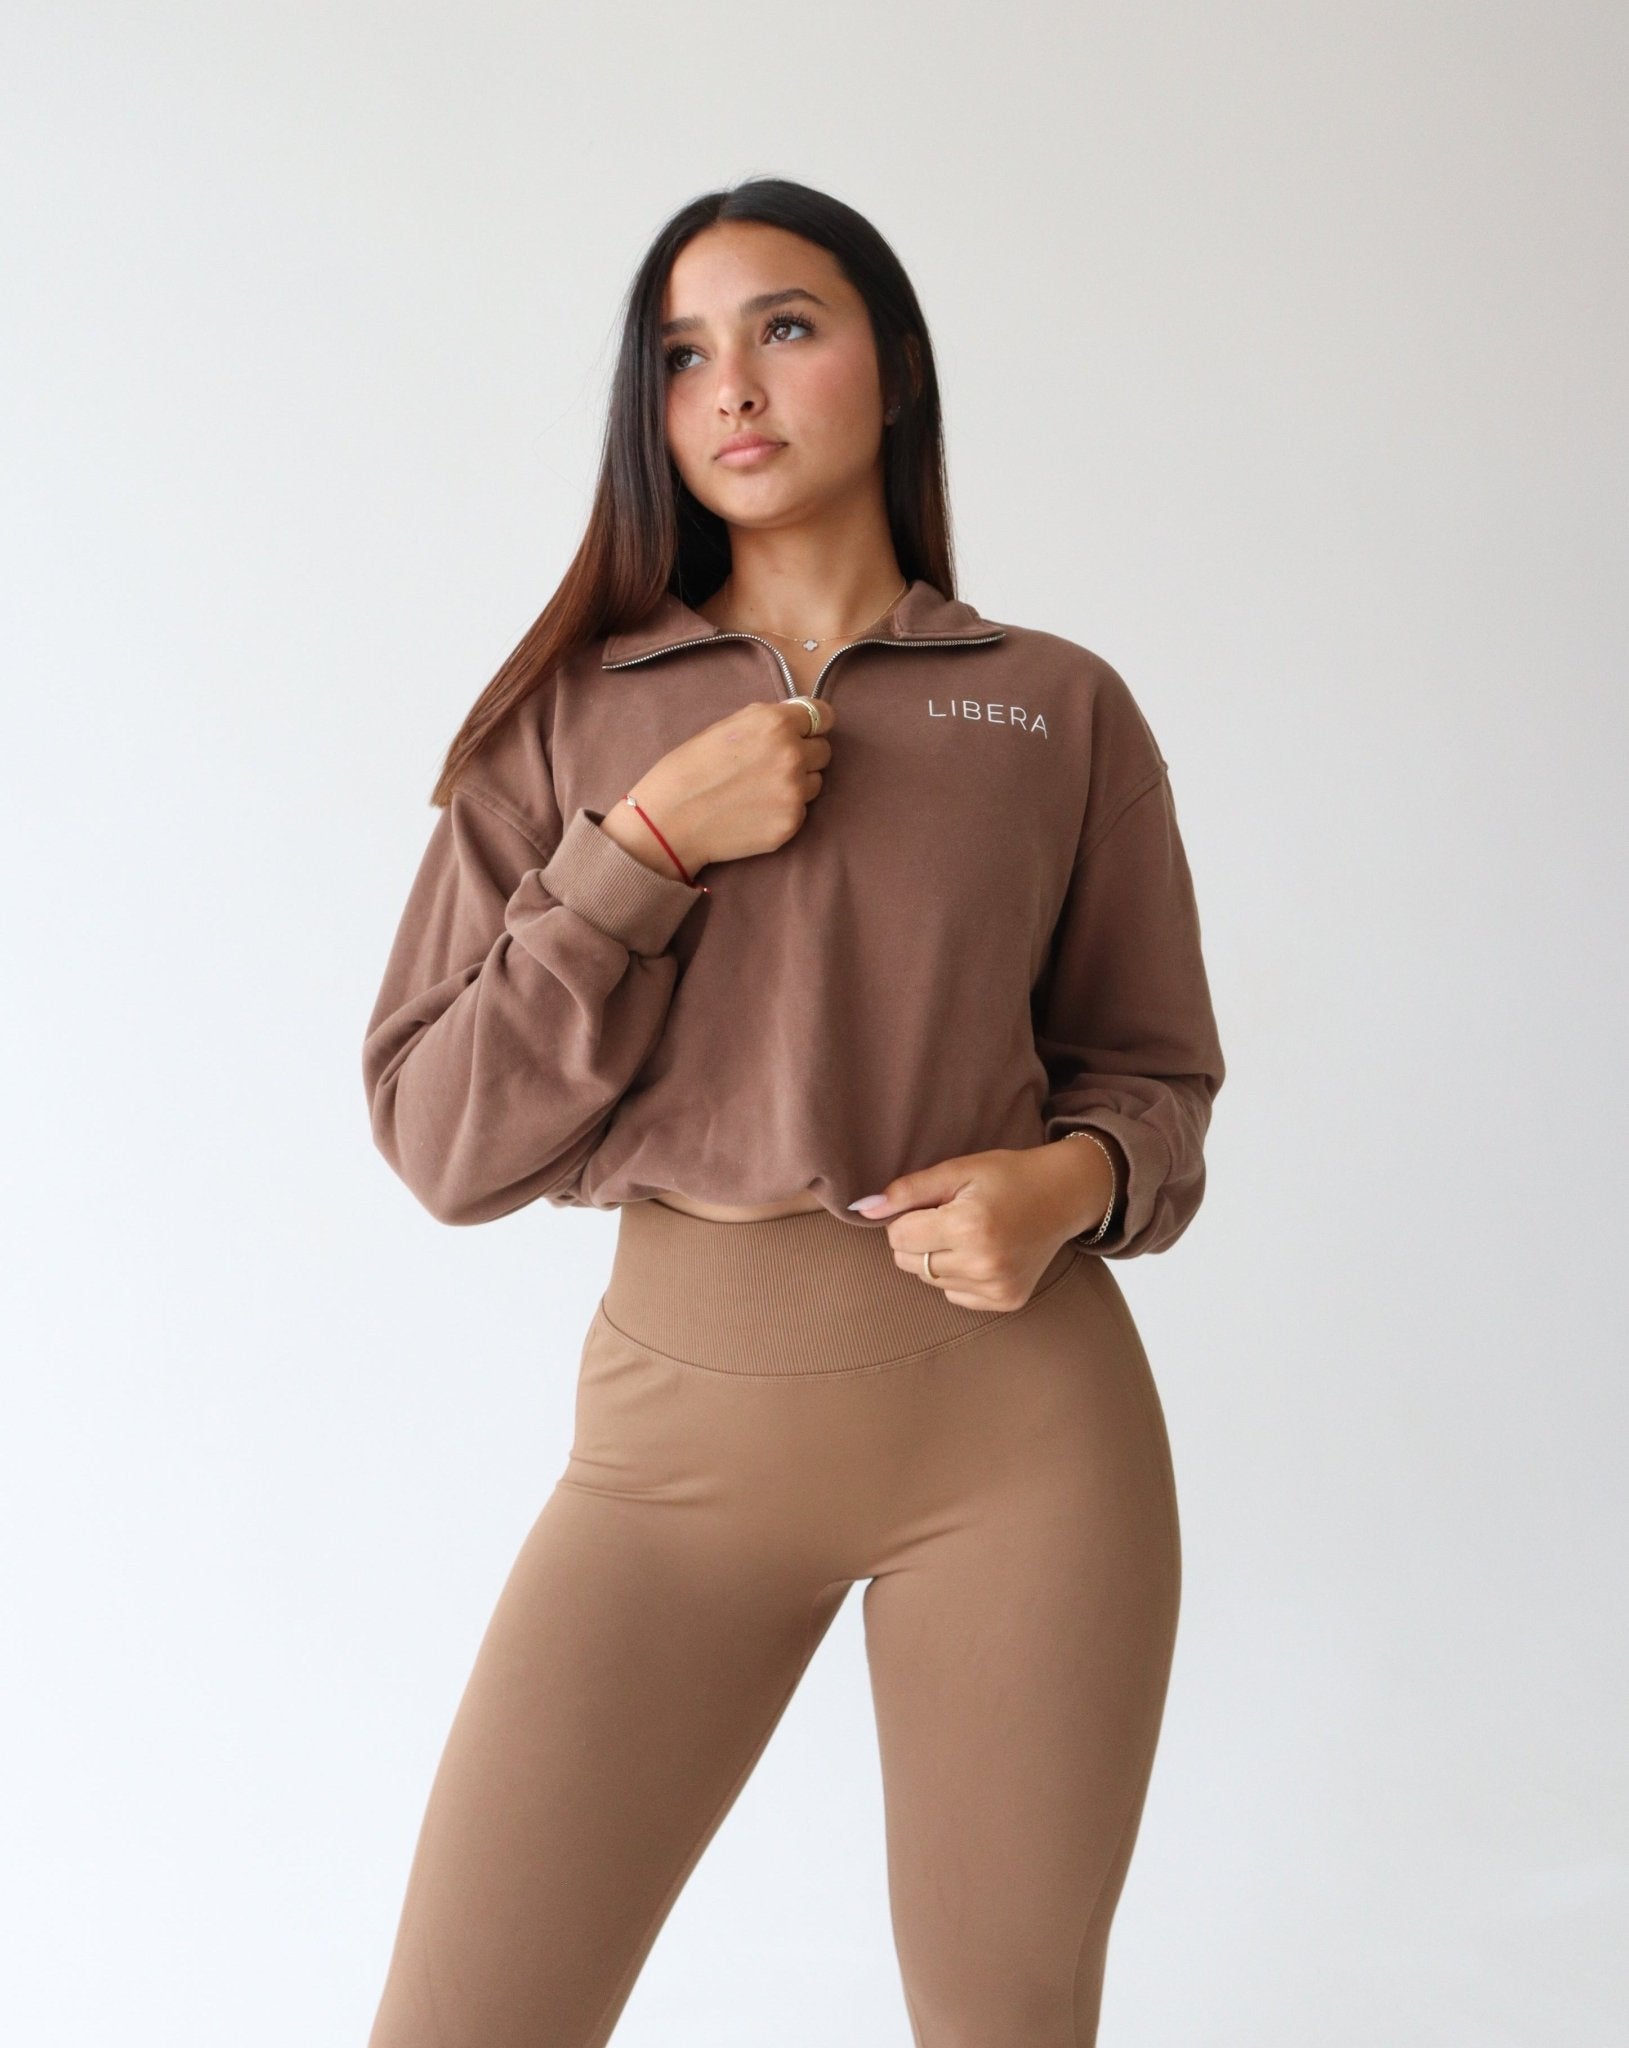 REFINE Quarter-Zip Sweater - MOCHA - LIBERA Fitness Apparel. Upgrade your comfort with our REFINE Quarter-Zip Sweater. Versatile and stylish design for any occasion.